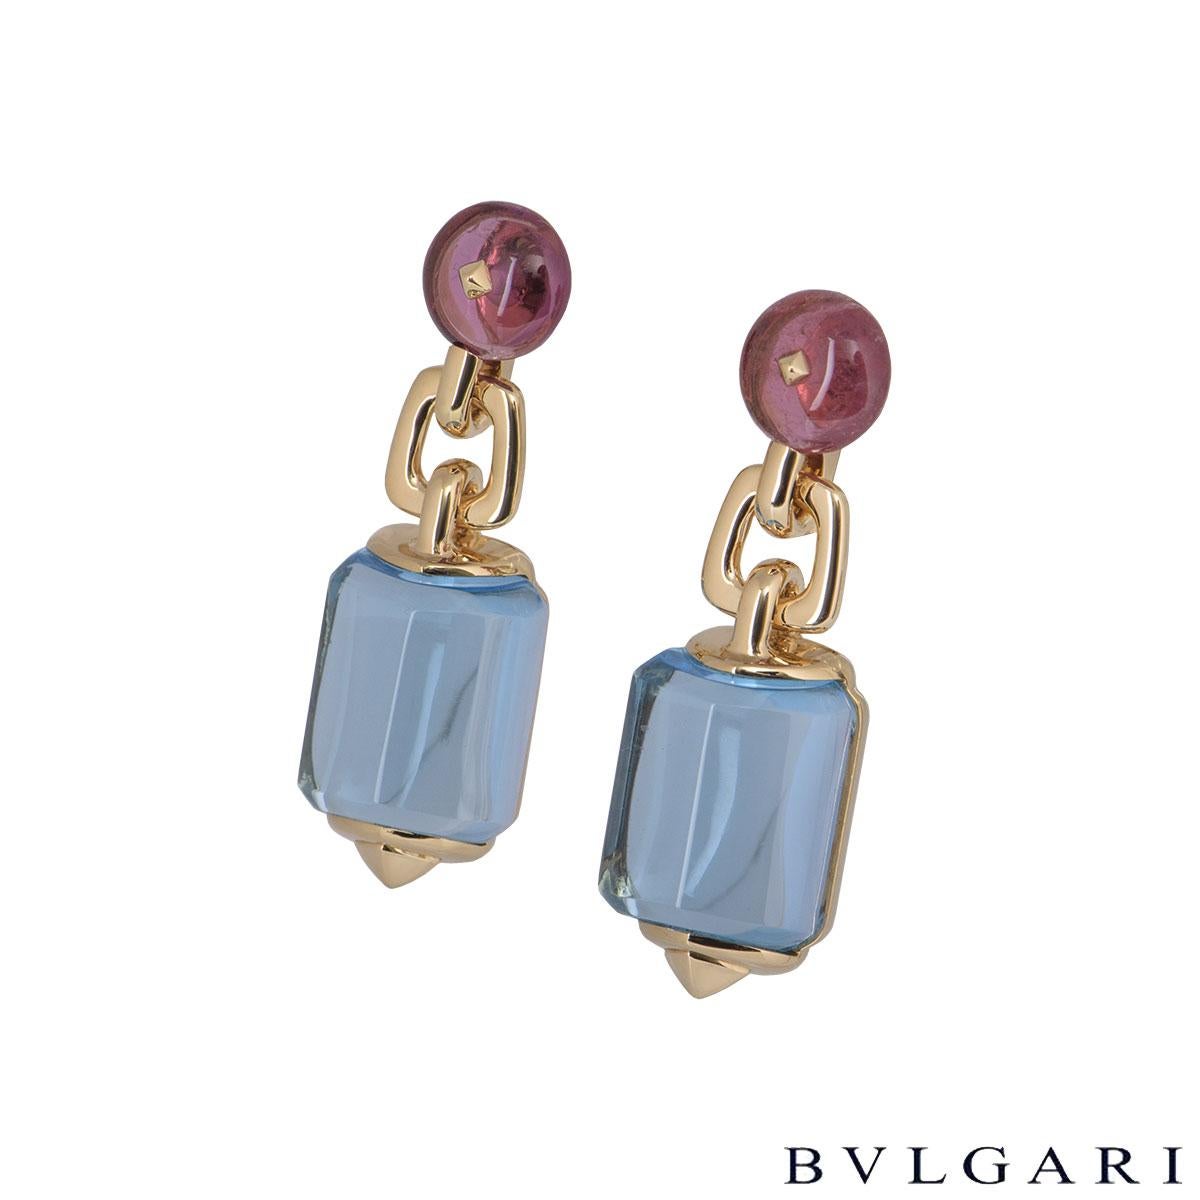 An 18k rose gold pair of earrings by Bvlgari. The earrings each comprise of a circular beaded amethyst with an aquamarine stone suspended underneath it. The earrings feature a clip on fitting with a length of 3.5cm and a gross weight of 23.48